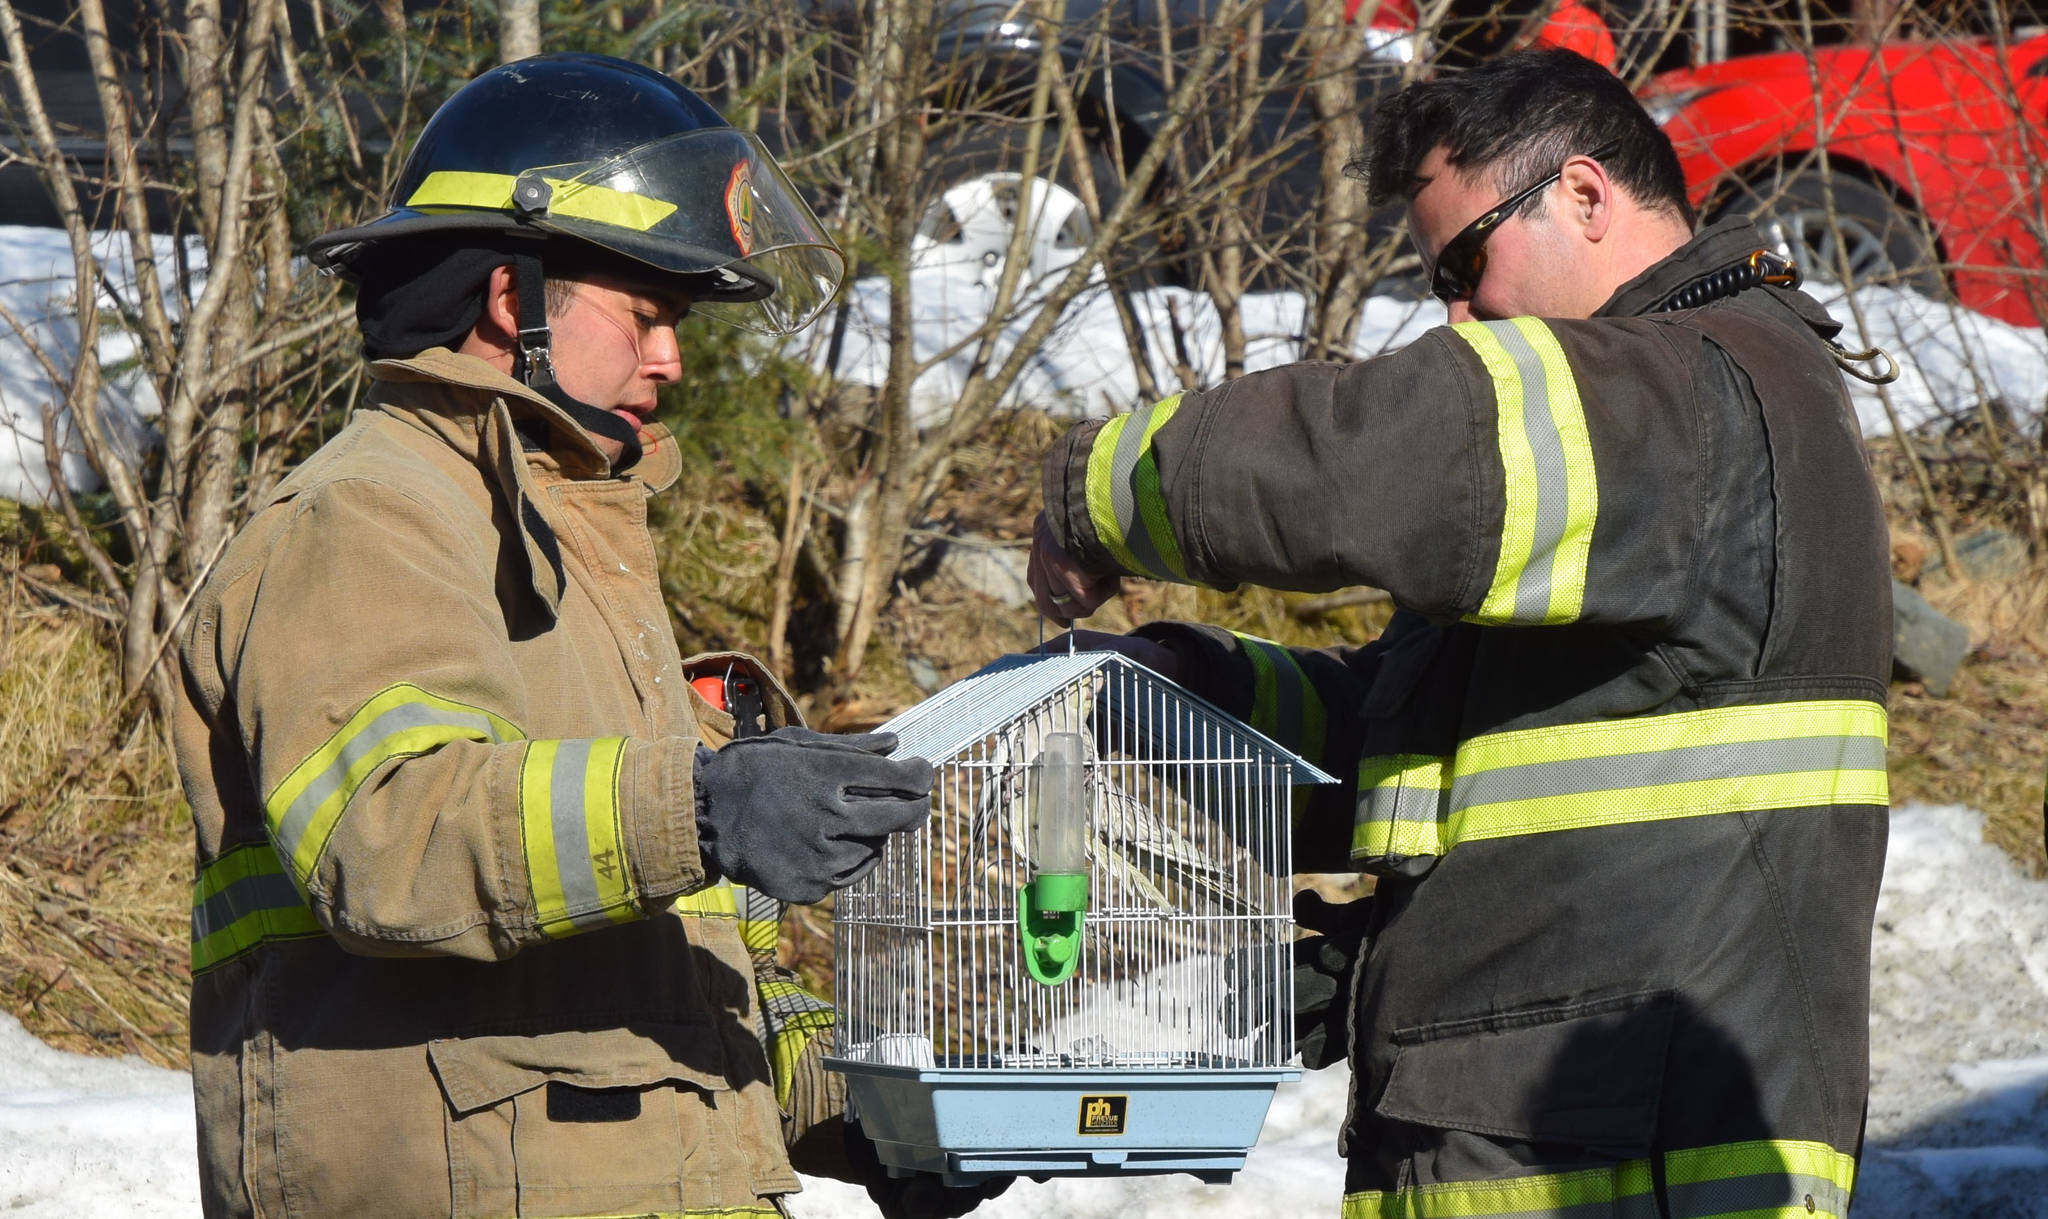 Two Capital City Fire/Rescue firefighters examine pet birds that survived a house fire in the Mendenhall Valley on Friday, March 30, 3018. A third bird died in the fire. (Alex McCarthy | Juneau Empire)